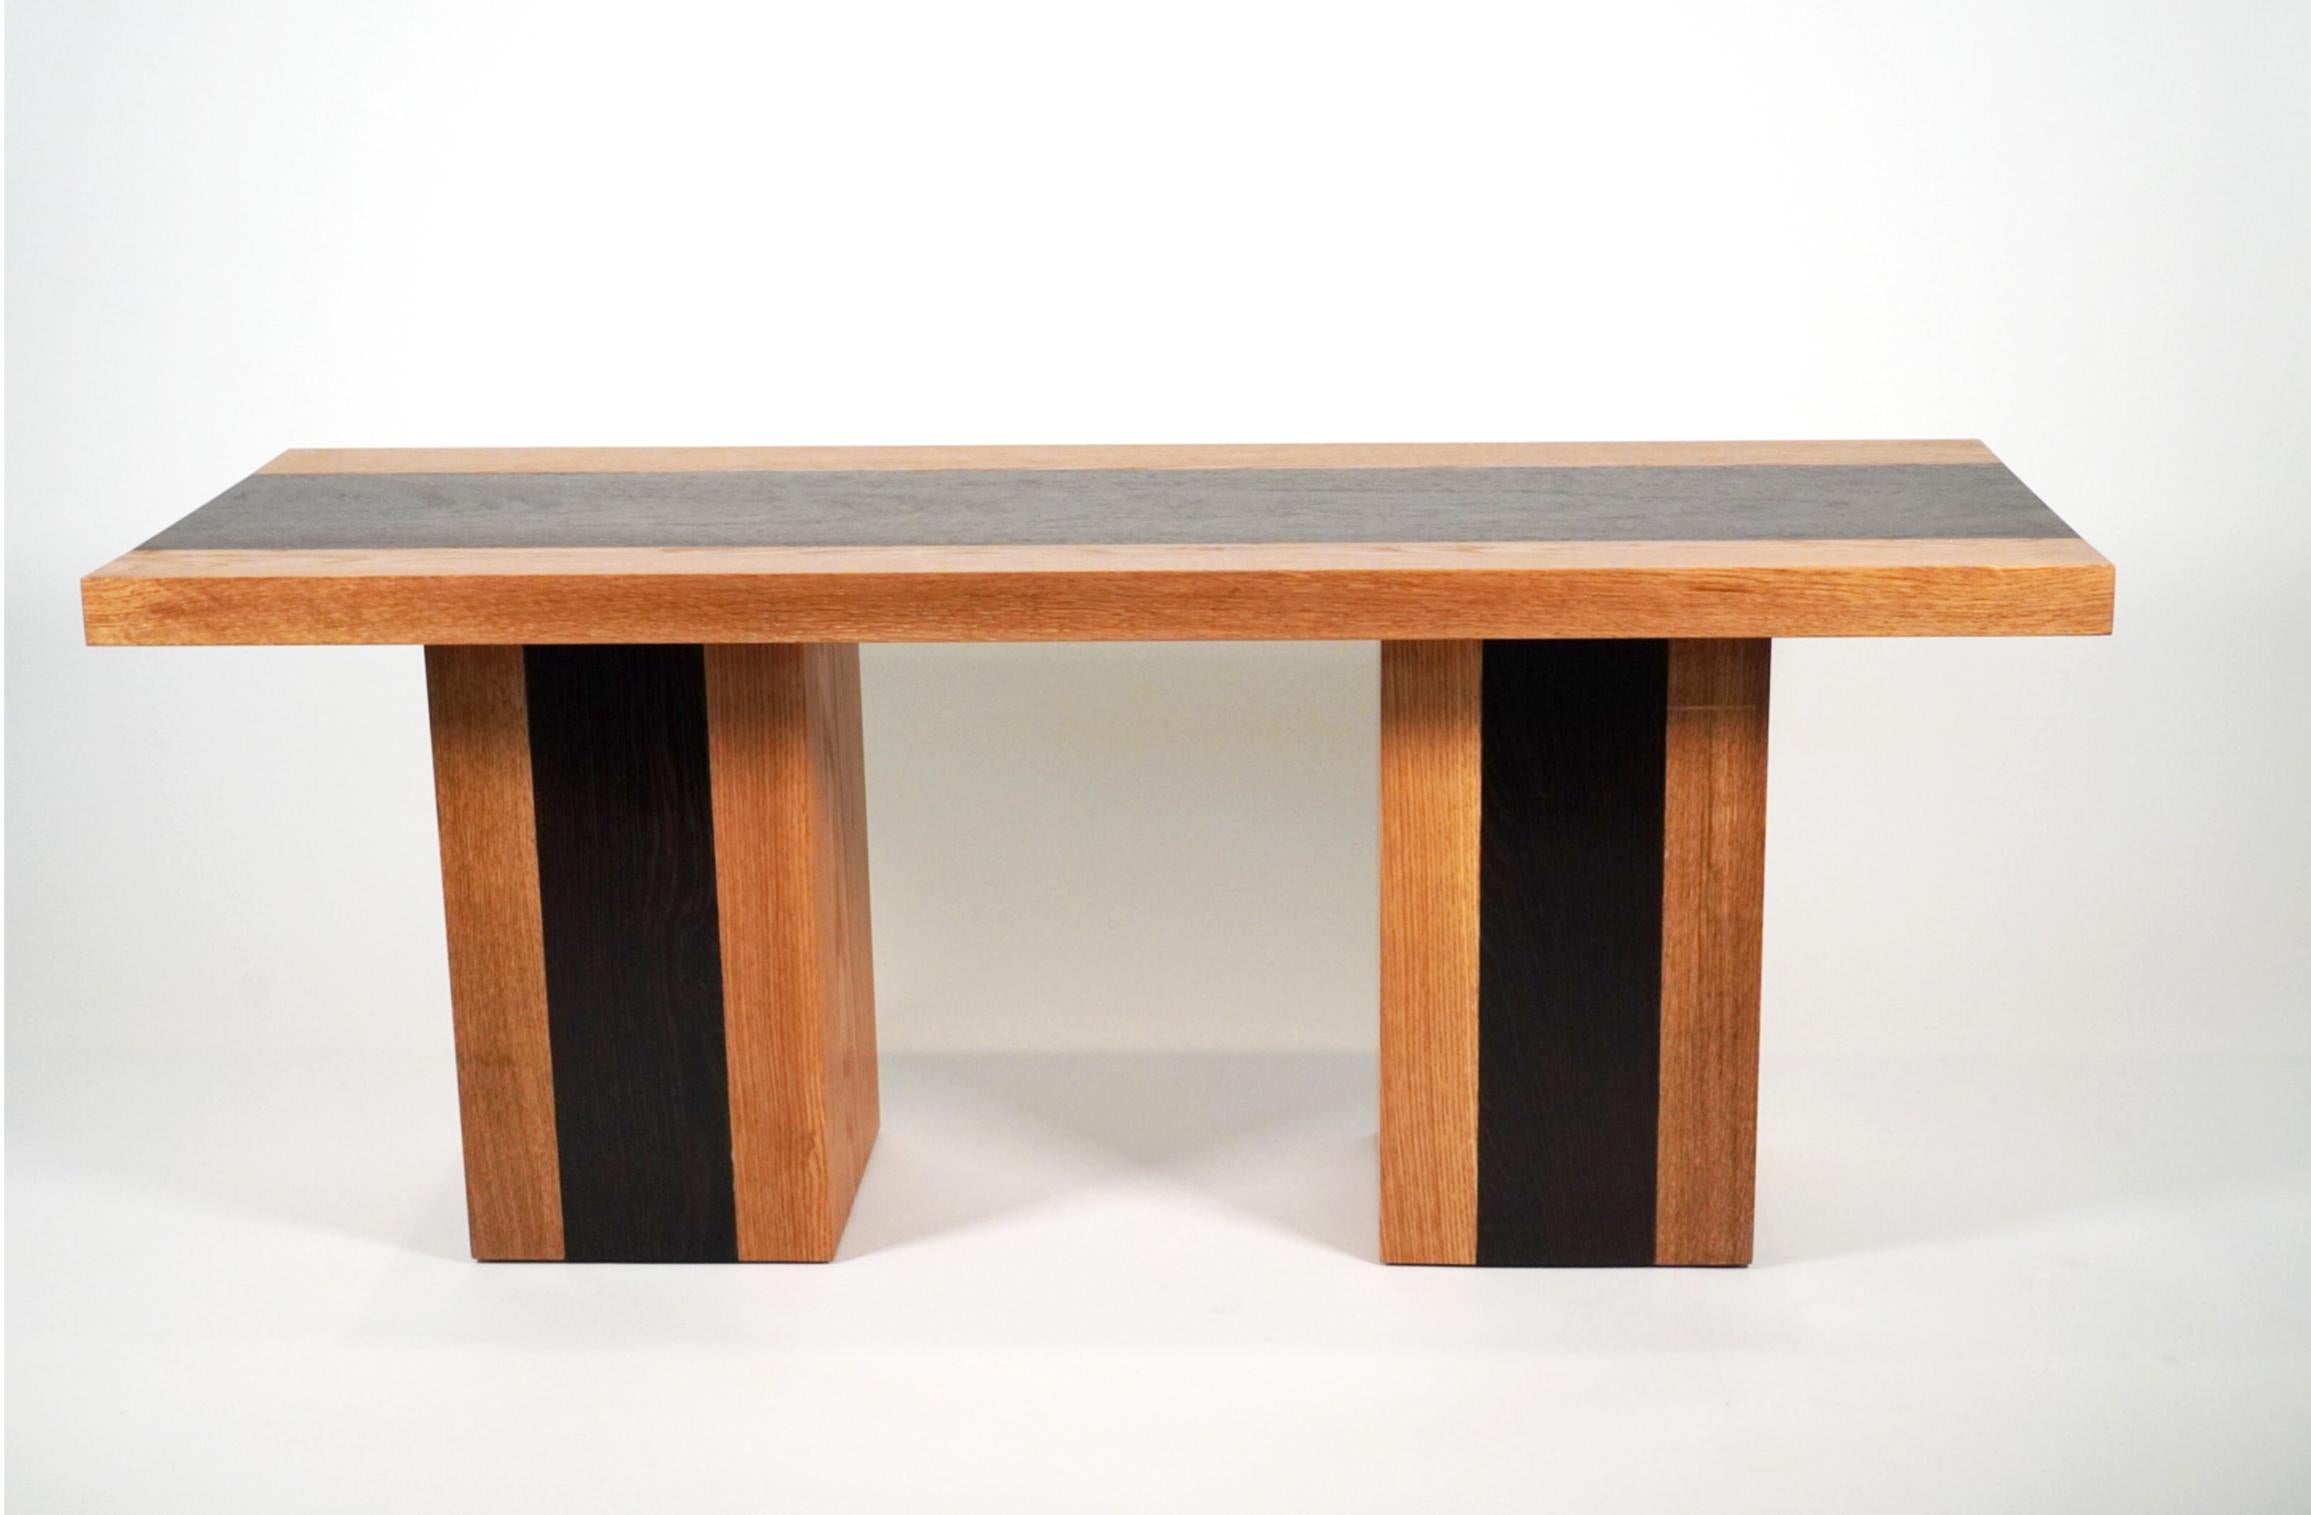 American 21st Century Minimalist Wenge and White Oak Plank Bench For Sale